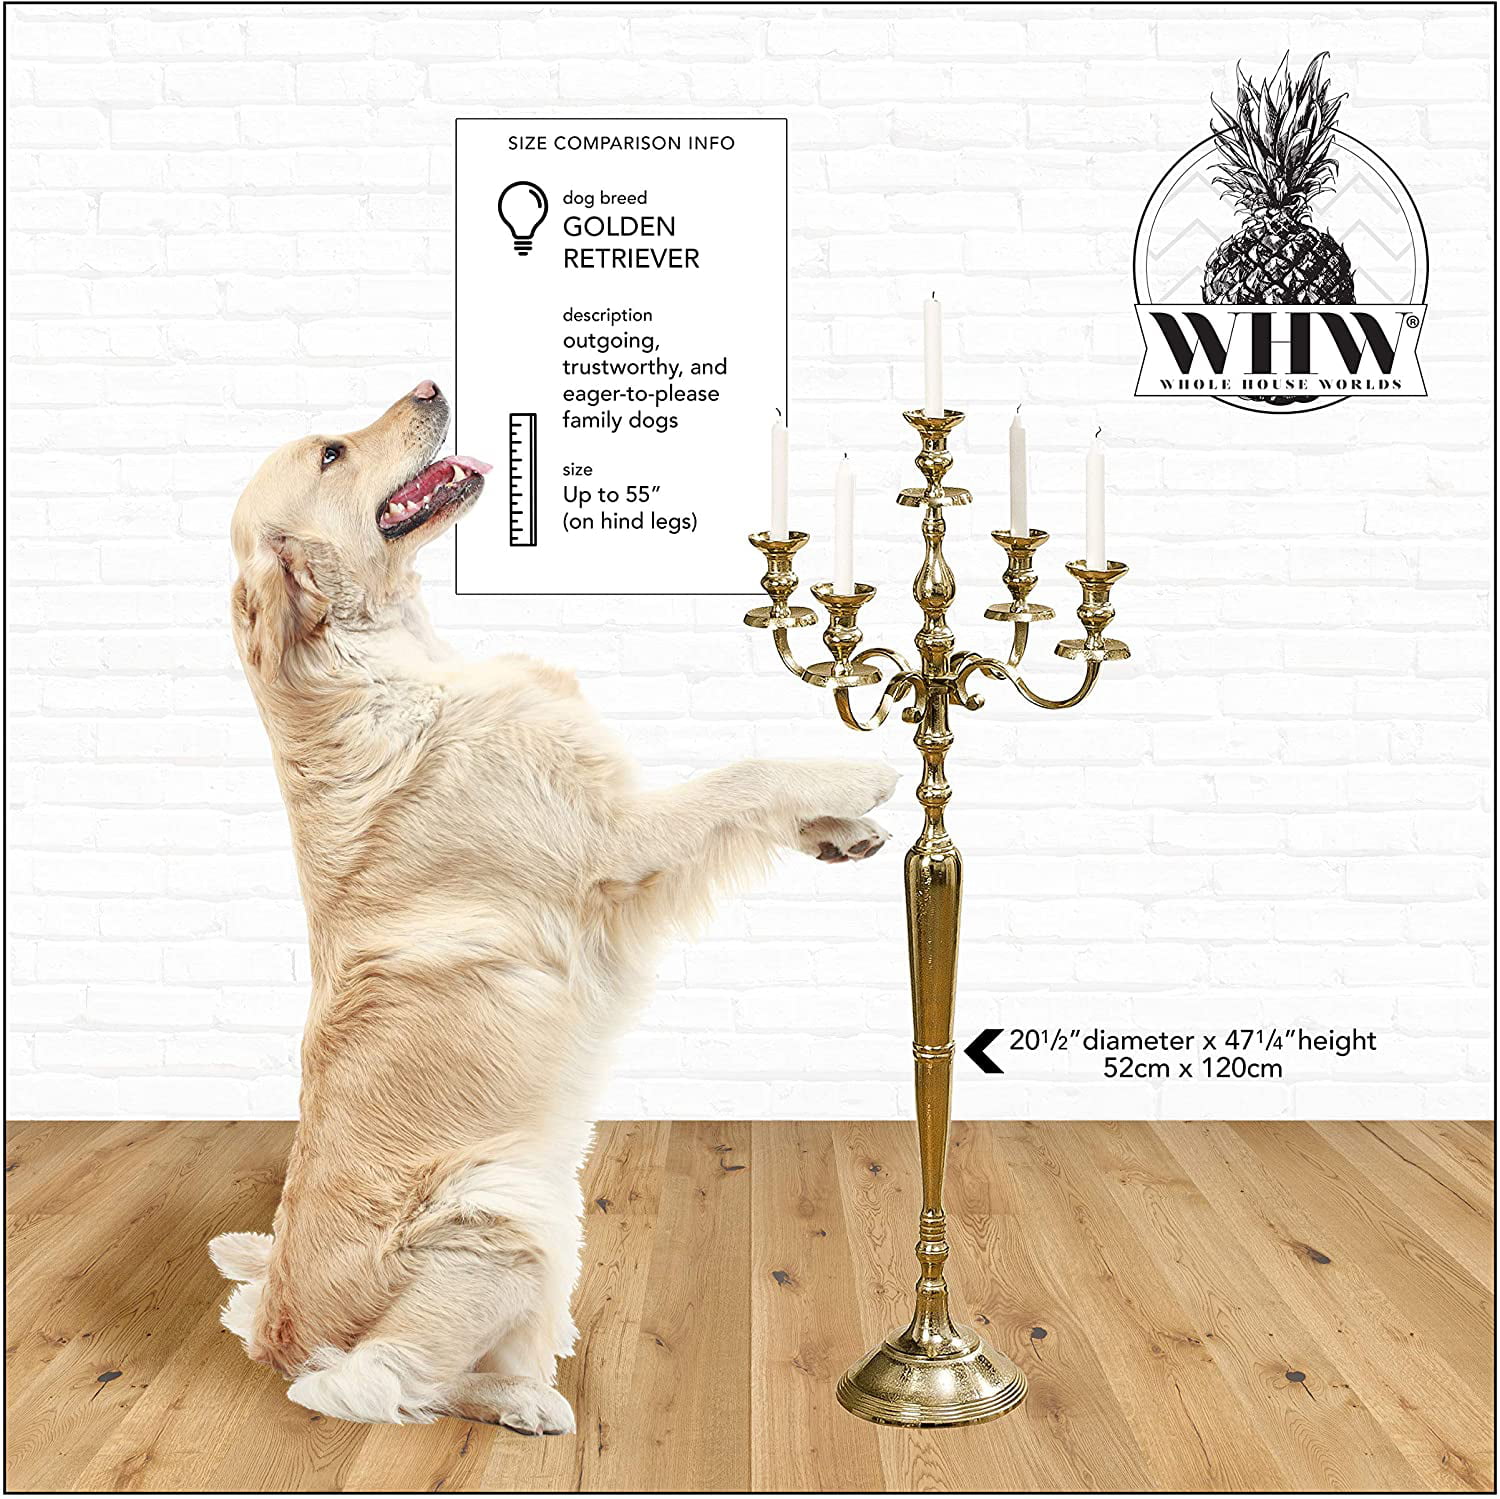 Over 1 FT 15 ¾ Inches Hand Crafted of Cast Aluminum Nickel WHW Whole House Worlds Hamptons Five Candle Golden Candelabra 